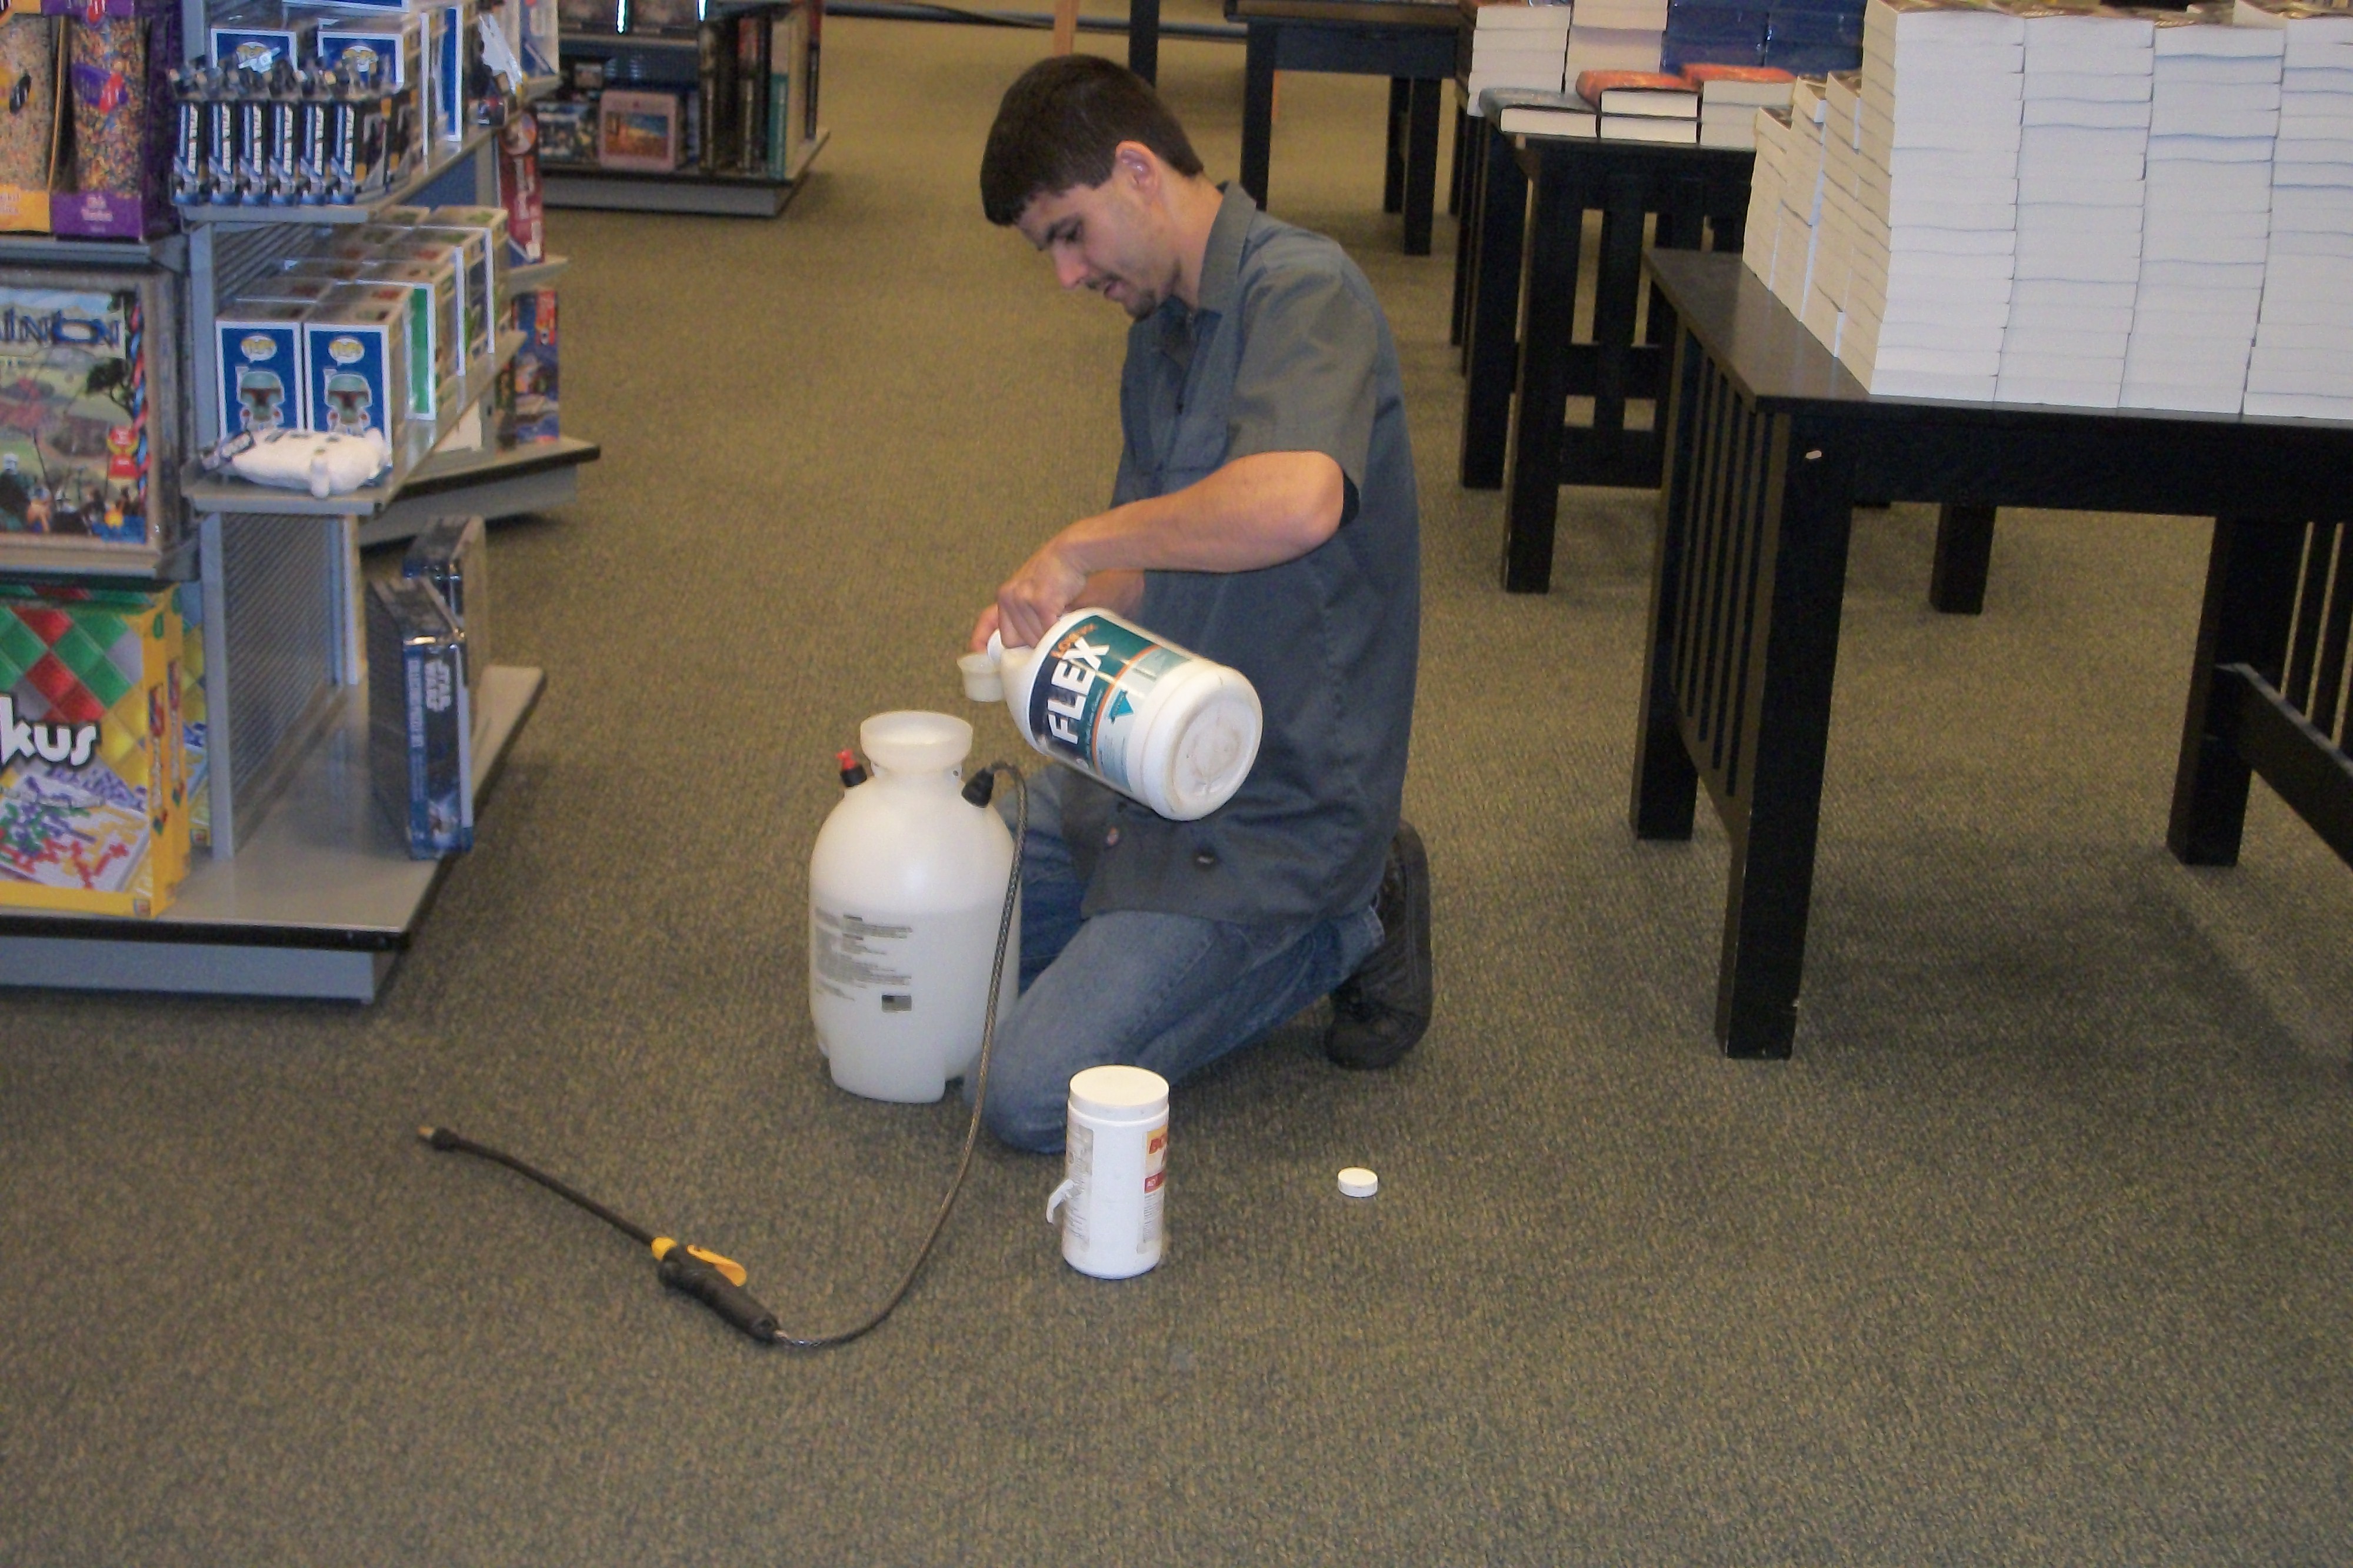 5 Questions to Ask Before Hiring a Carpet and Upholstery Cleaner